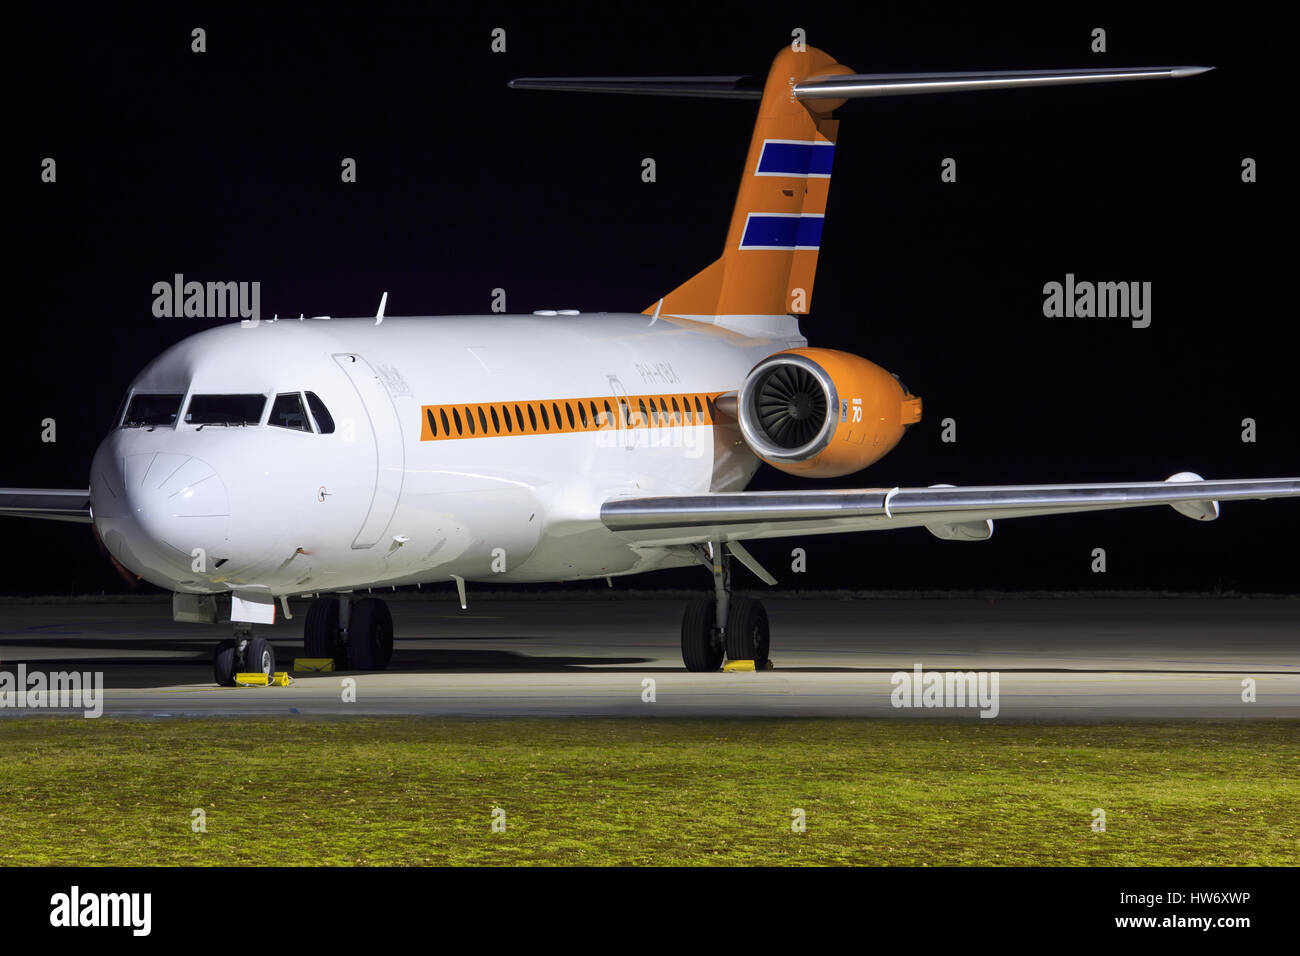 Karlsruhe/Germany March 10, 2017: Government of the Netherlands Fokker 70 at Karlsruhe Airport. Stock Photo